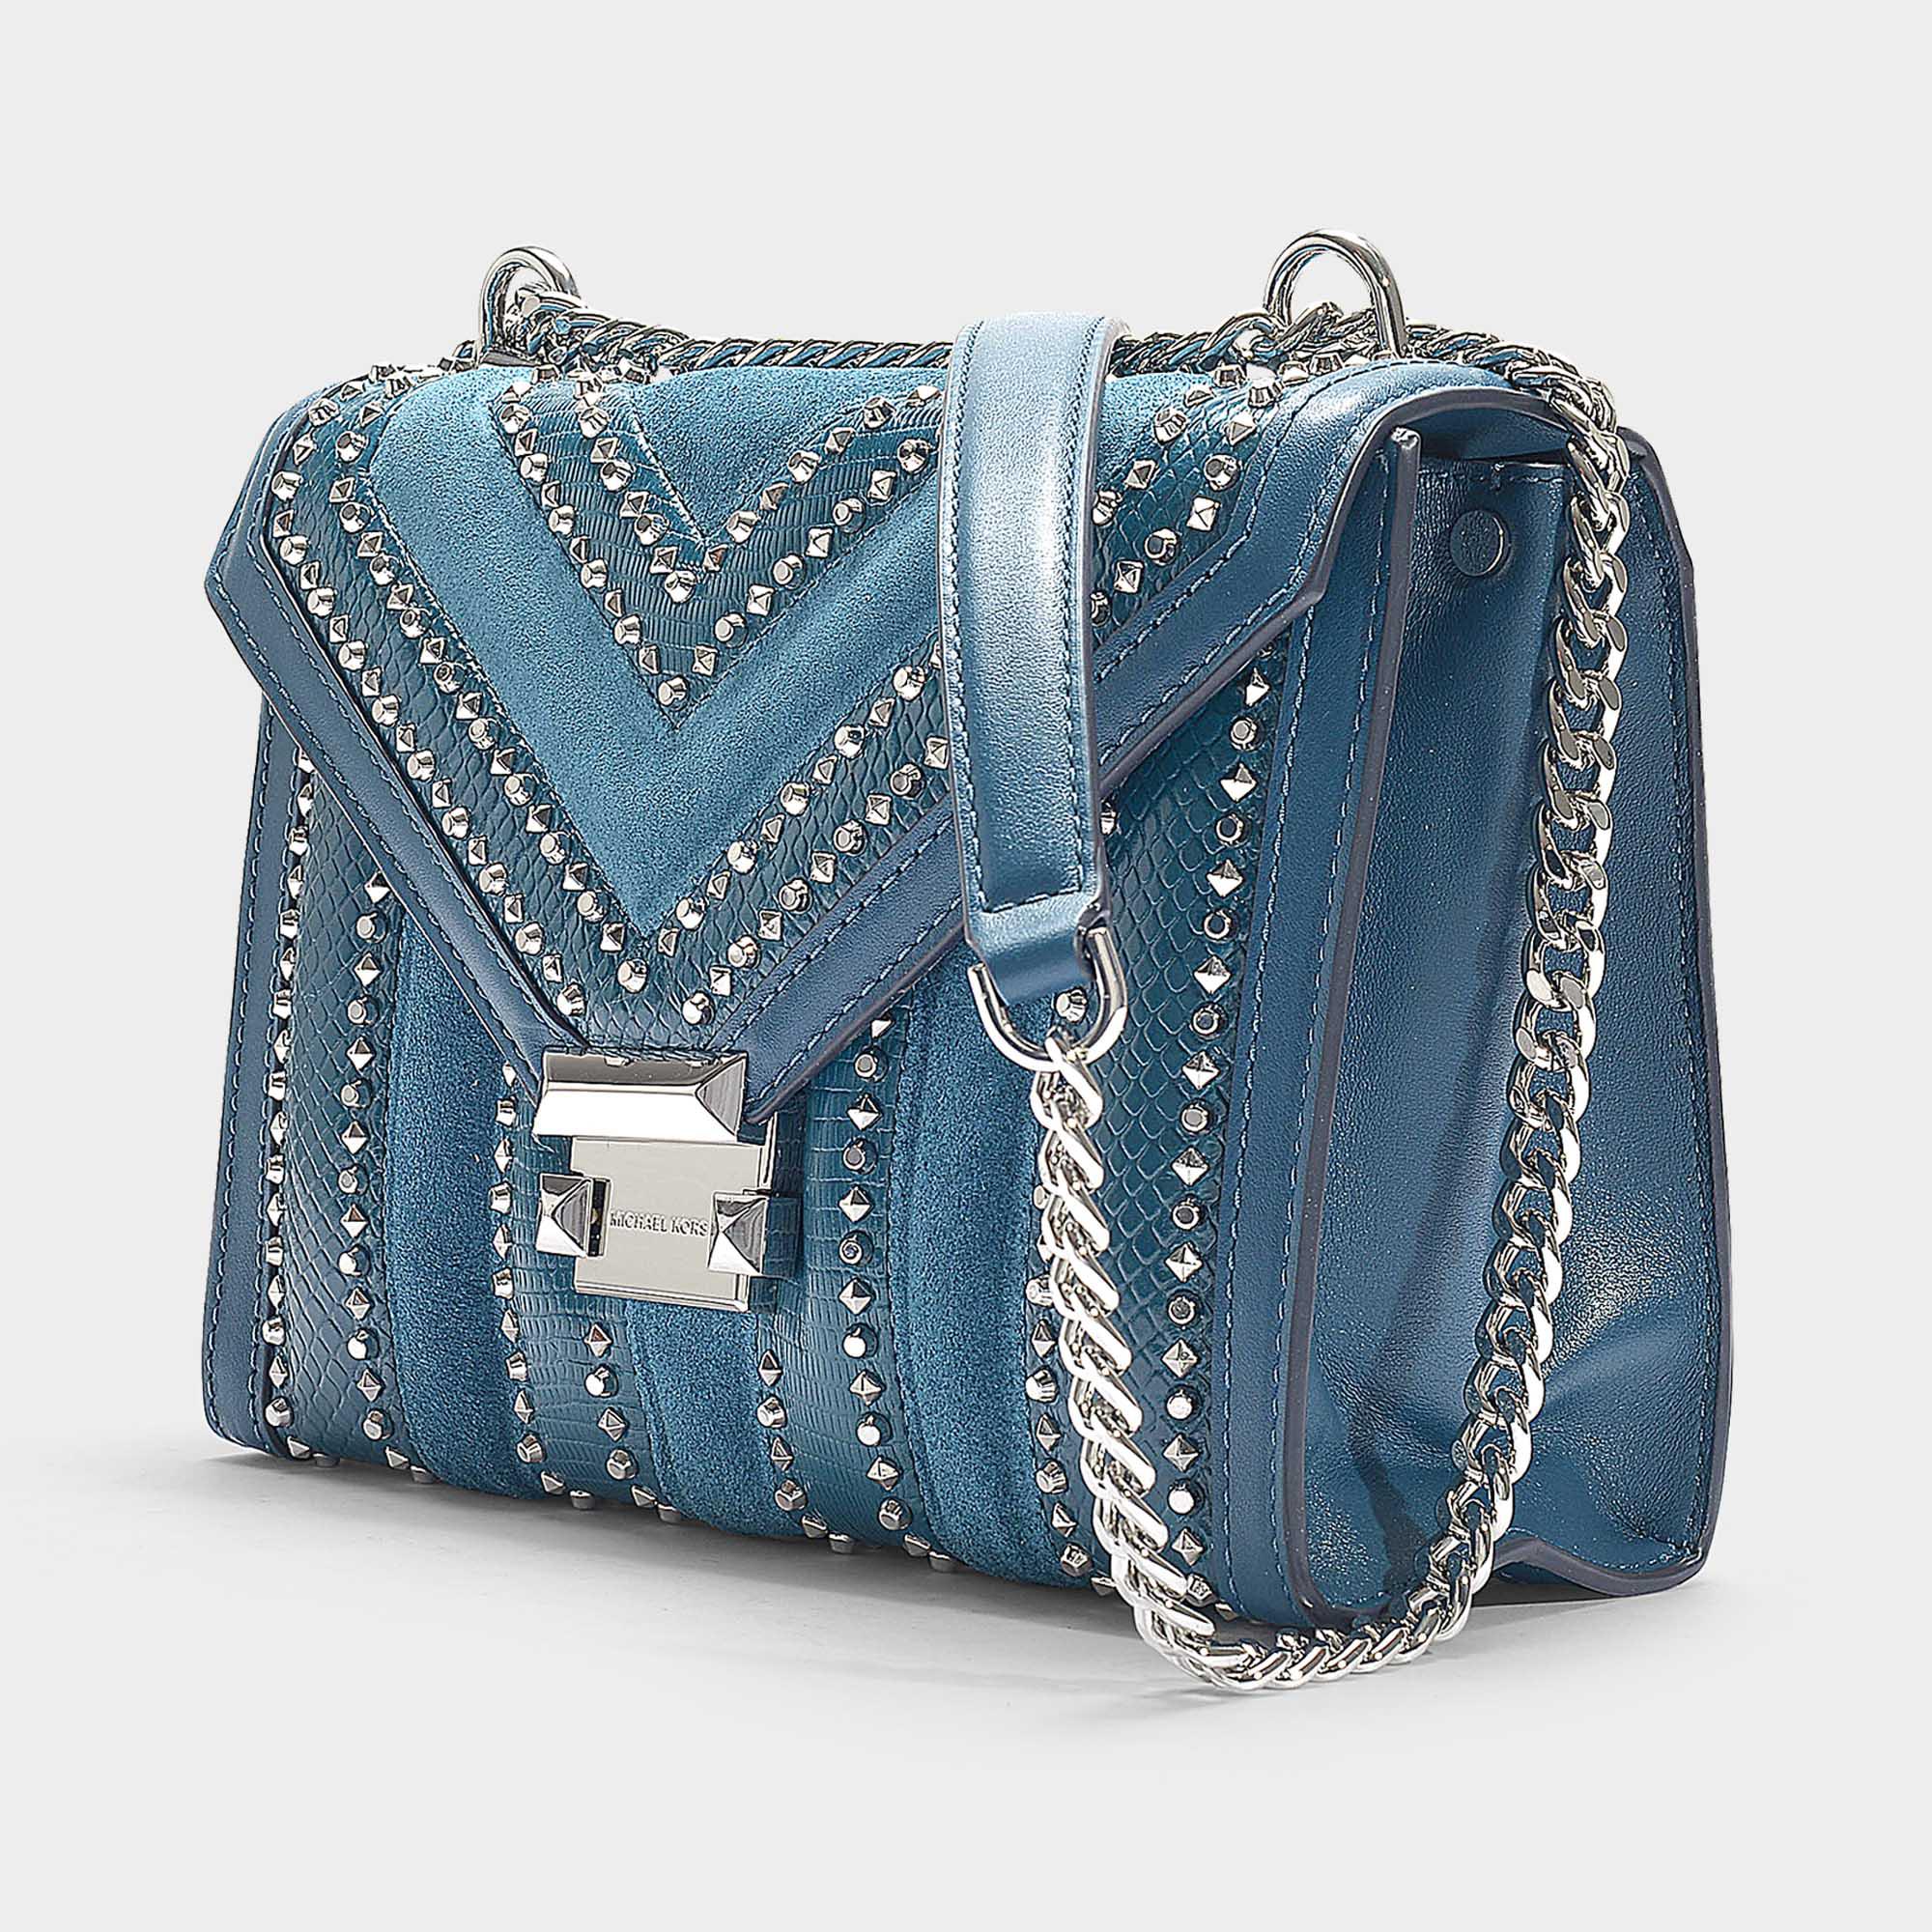 MICHAEL Michael Whitney Studded & Leather Shoulder Bag in Blue - Lyst